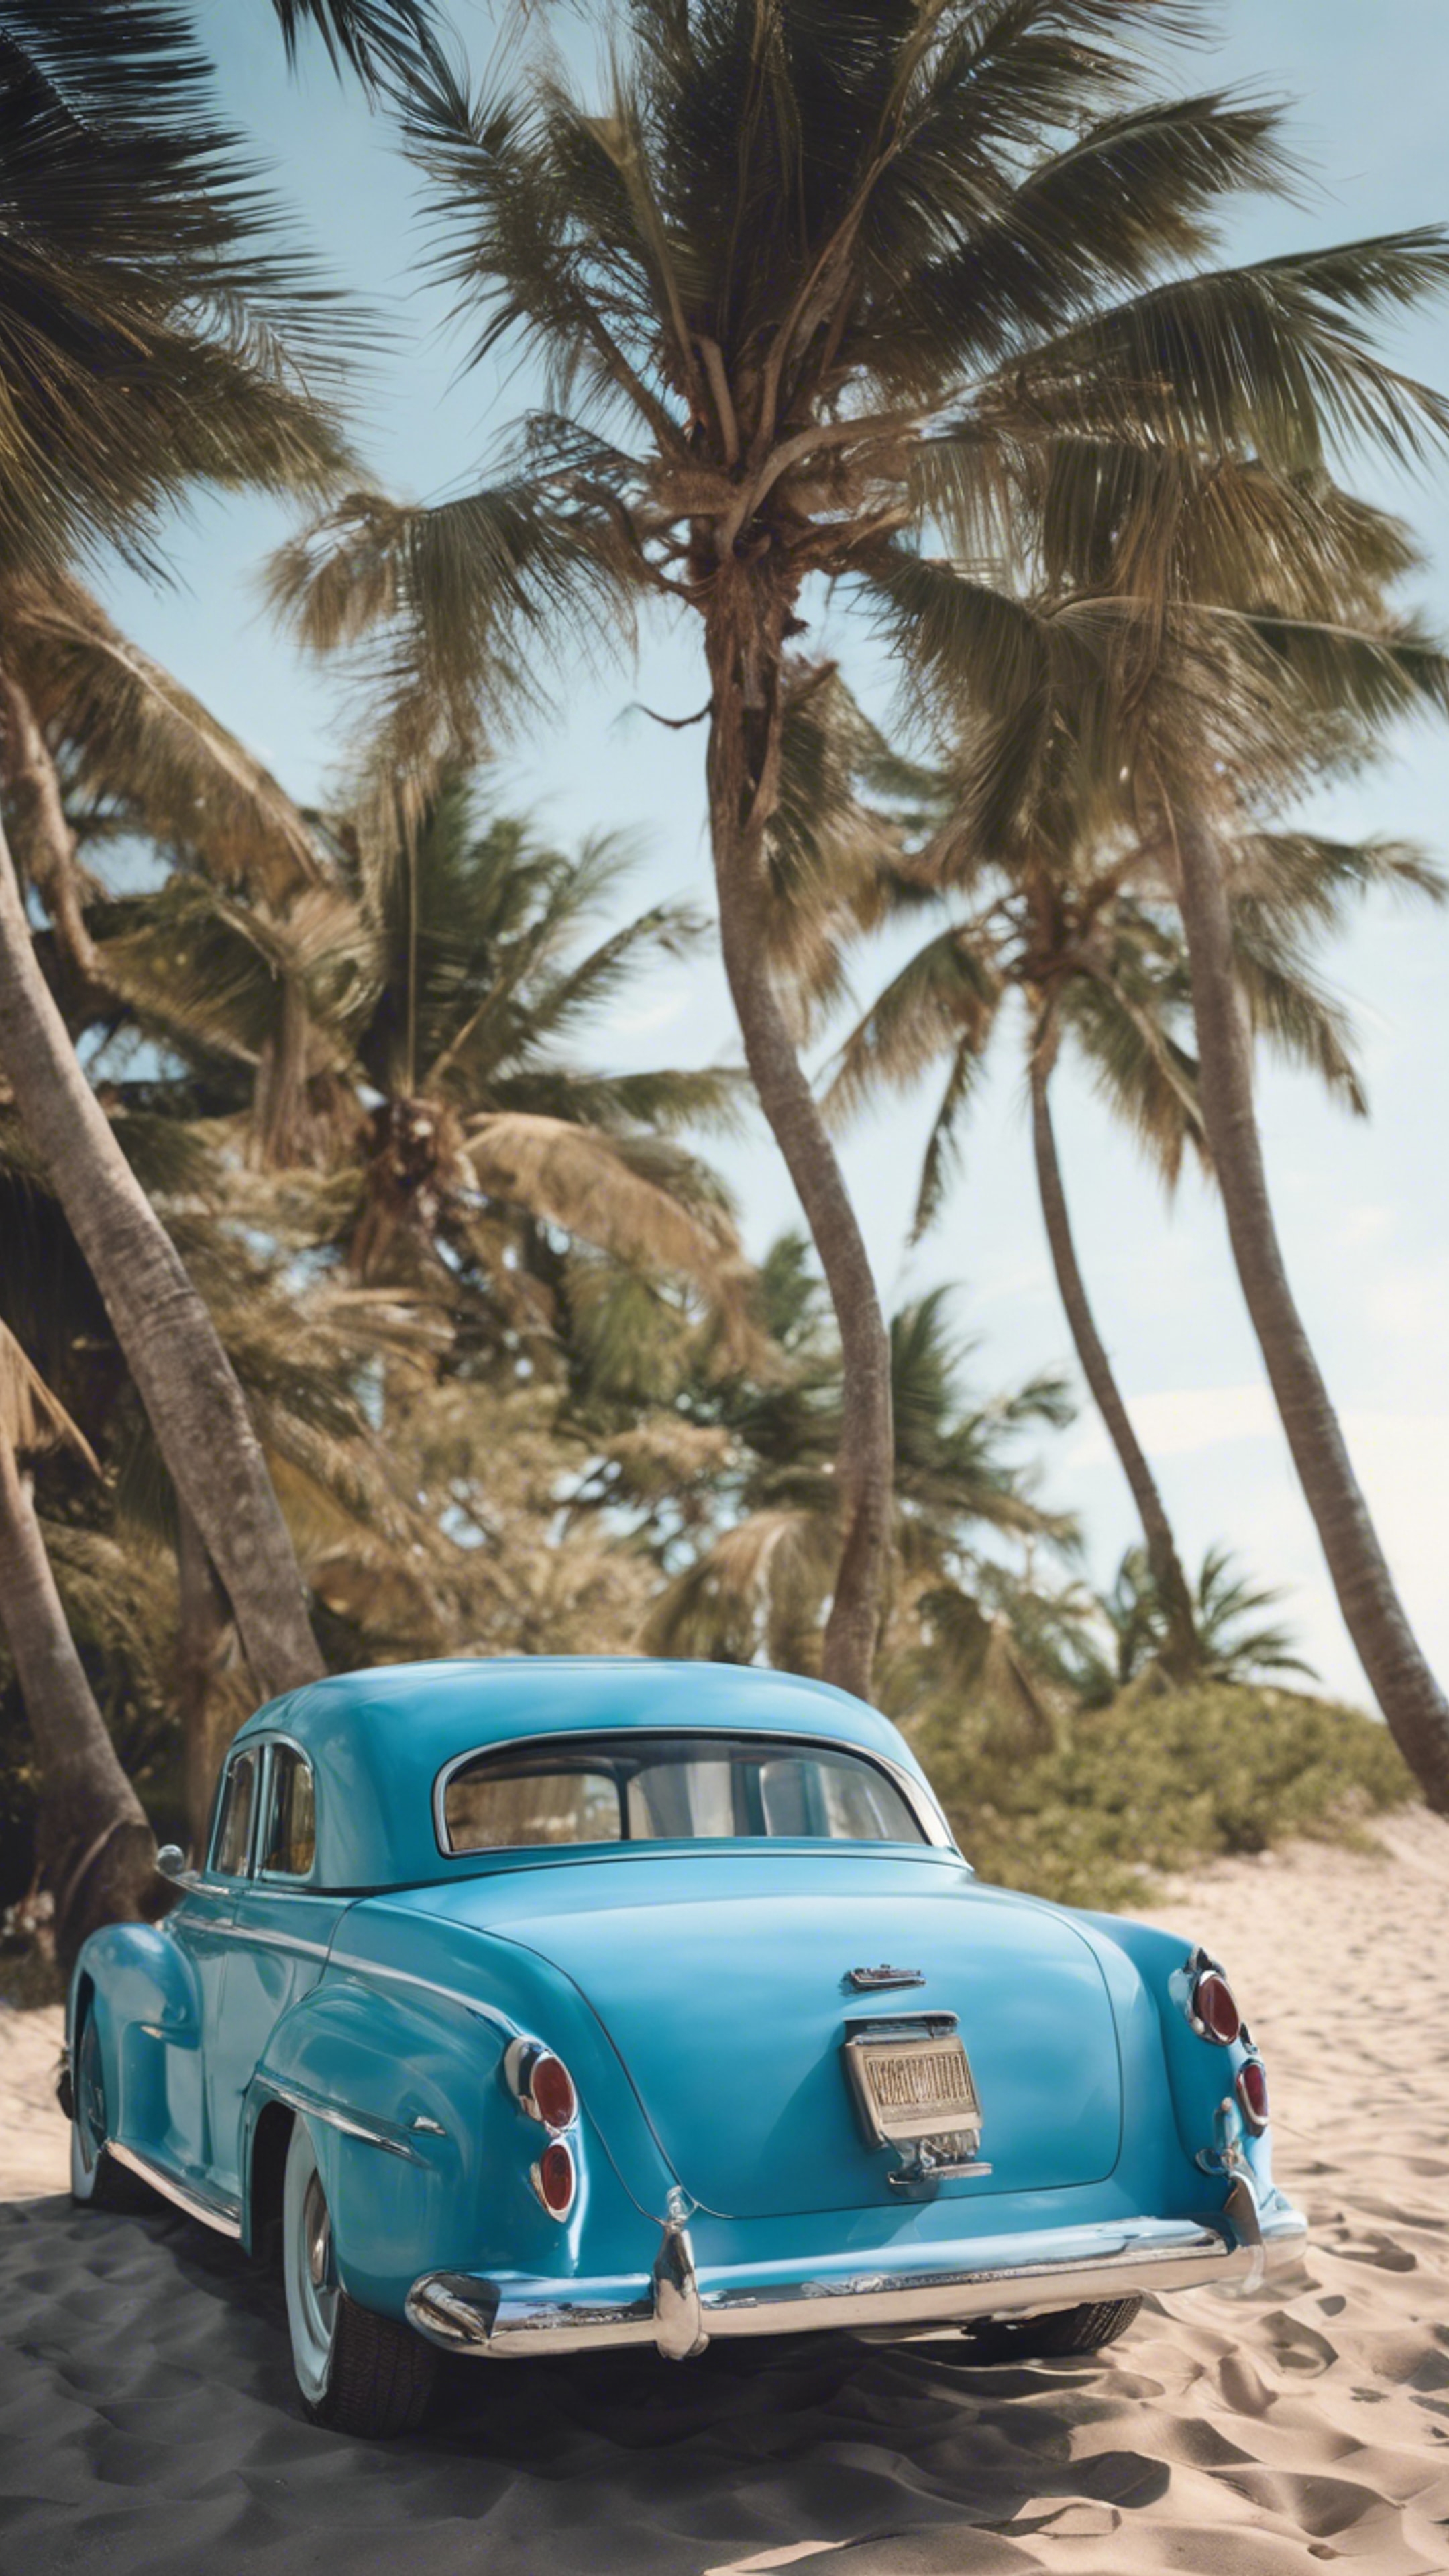 A vintage car painted in cool blue, parked by the beach Tapet[7559f4037ca44818afd1]